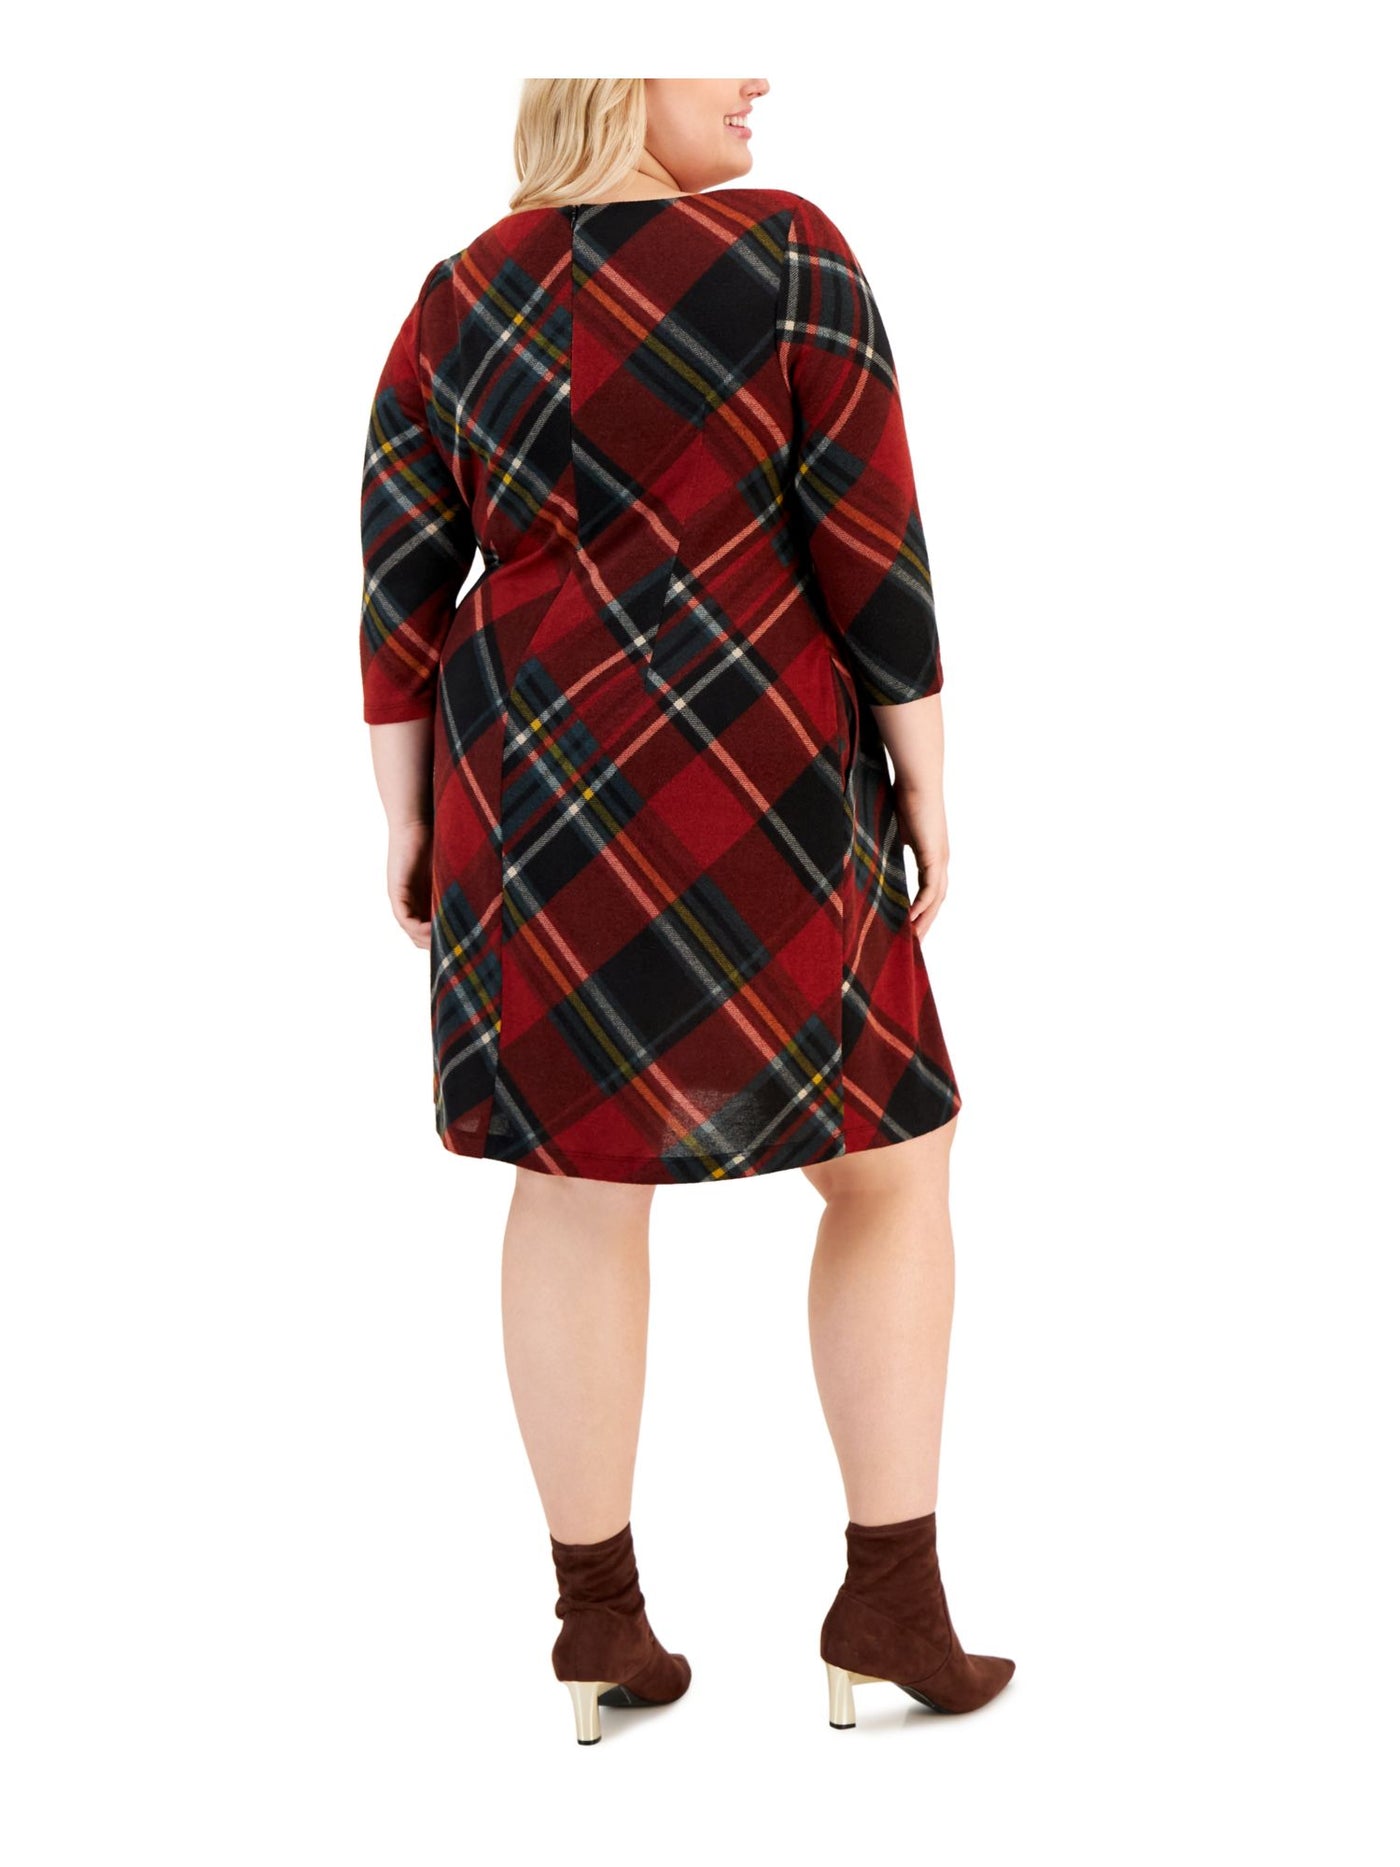 CONNECTED APPAREL Womens Maroon Zippered Pocketed Unlined Pleated Plaid 3/4 Sleeve Round Neck Knee Length Fit + Flare Dress Plus 16W